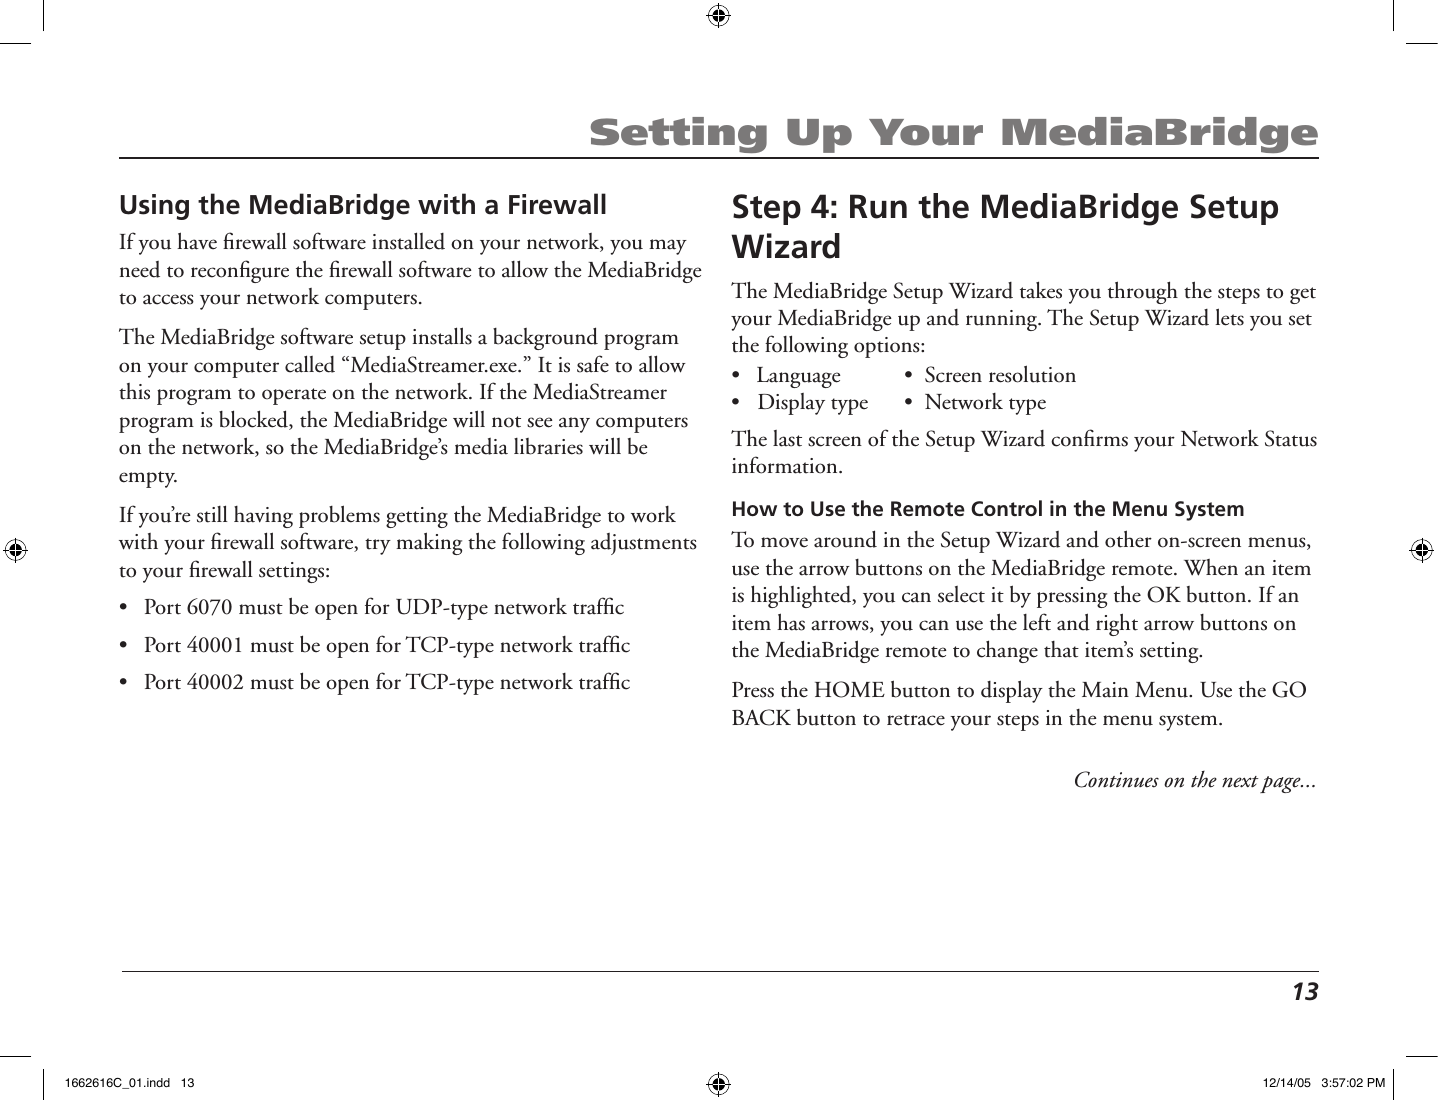  13Setting Up Your MediaBridgeStep 4: Run the MediaBridge Setup WizardThe MediaBridge Setup Wizard takes you through the steps to get your MediaBridge up and running. The Setup Wizard lets you set the following options:•  Language      •  Screen resolution  •   Display type      •  Network typeThe last screen of the Setup Wizard conﬁrms your Network Status information.How to Use the Remote Control in the Menu SystemTo move around in the Setup Wizard and other on-screen menus, use the arrow buttons on the MediaBridge remote. When an item is highlighted, you can select it by pressing the OK button. If an item has arrows, you can use the left and right arrow buttons on the MediaBridge remote to change that item’s setting.Press the HOME button to display the Main Menu. Use the GO BACK button to retrace your steps in the menu system.Using the MediaBridge with a FirewallIf you have ﬁrewall software installed on your network, you may need to reconﬁgure the ﬁrewall software to allow the MediaBridge to access your network computers. The MediaBridge software setup installs a background program on your computer called “MediaStreamer.exe.” It is safe to allow this program to operate on the network. If the MediaStreamer program is blocked, the MediaBridge will not see any computers on the network, so the MediaBridge’s media libraries will be empty.If you’re still having problems getting the MediaBridge to work with your ﬁrewall software, try making the following adjustments to your ﬁrewall settings:•  Port 6070 must be open for UDP-type network trafﬁc•  Port 40001 must be open for TCP-type network trafﬁc•  Port 40002 must be open for TCP-type network trafﬁcContinues on the next page...1662616C_01.indd   13 12/14/05   3:57:02 PM